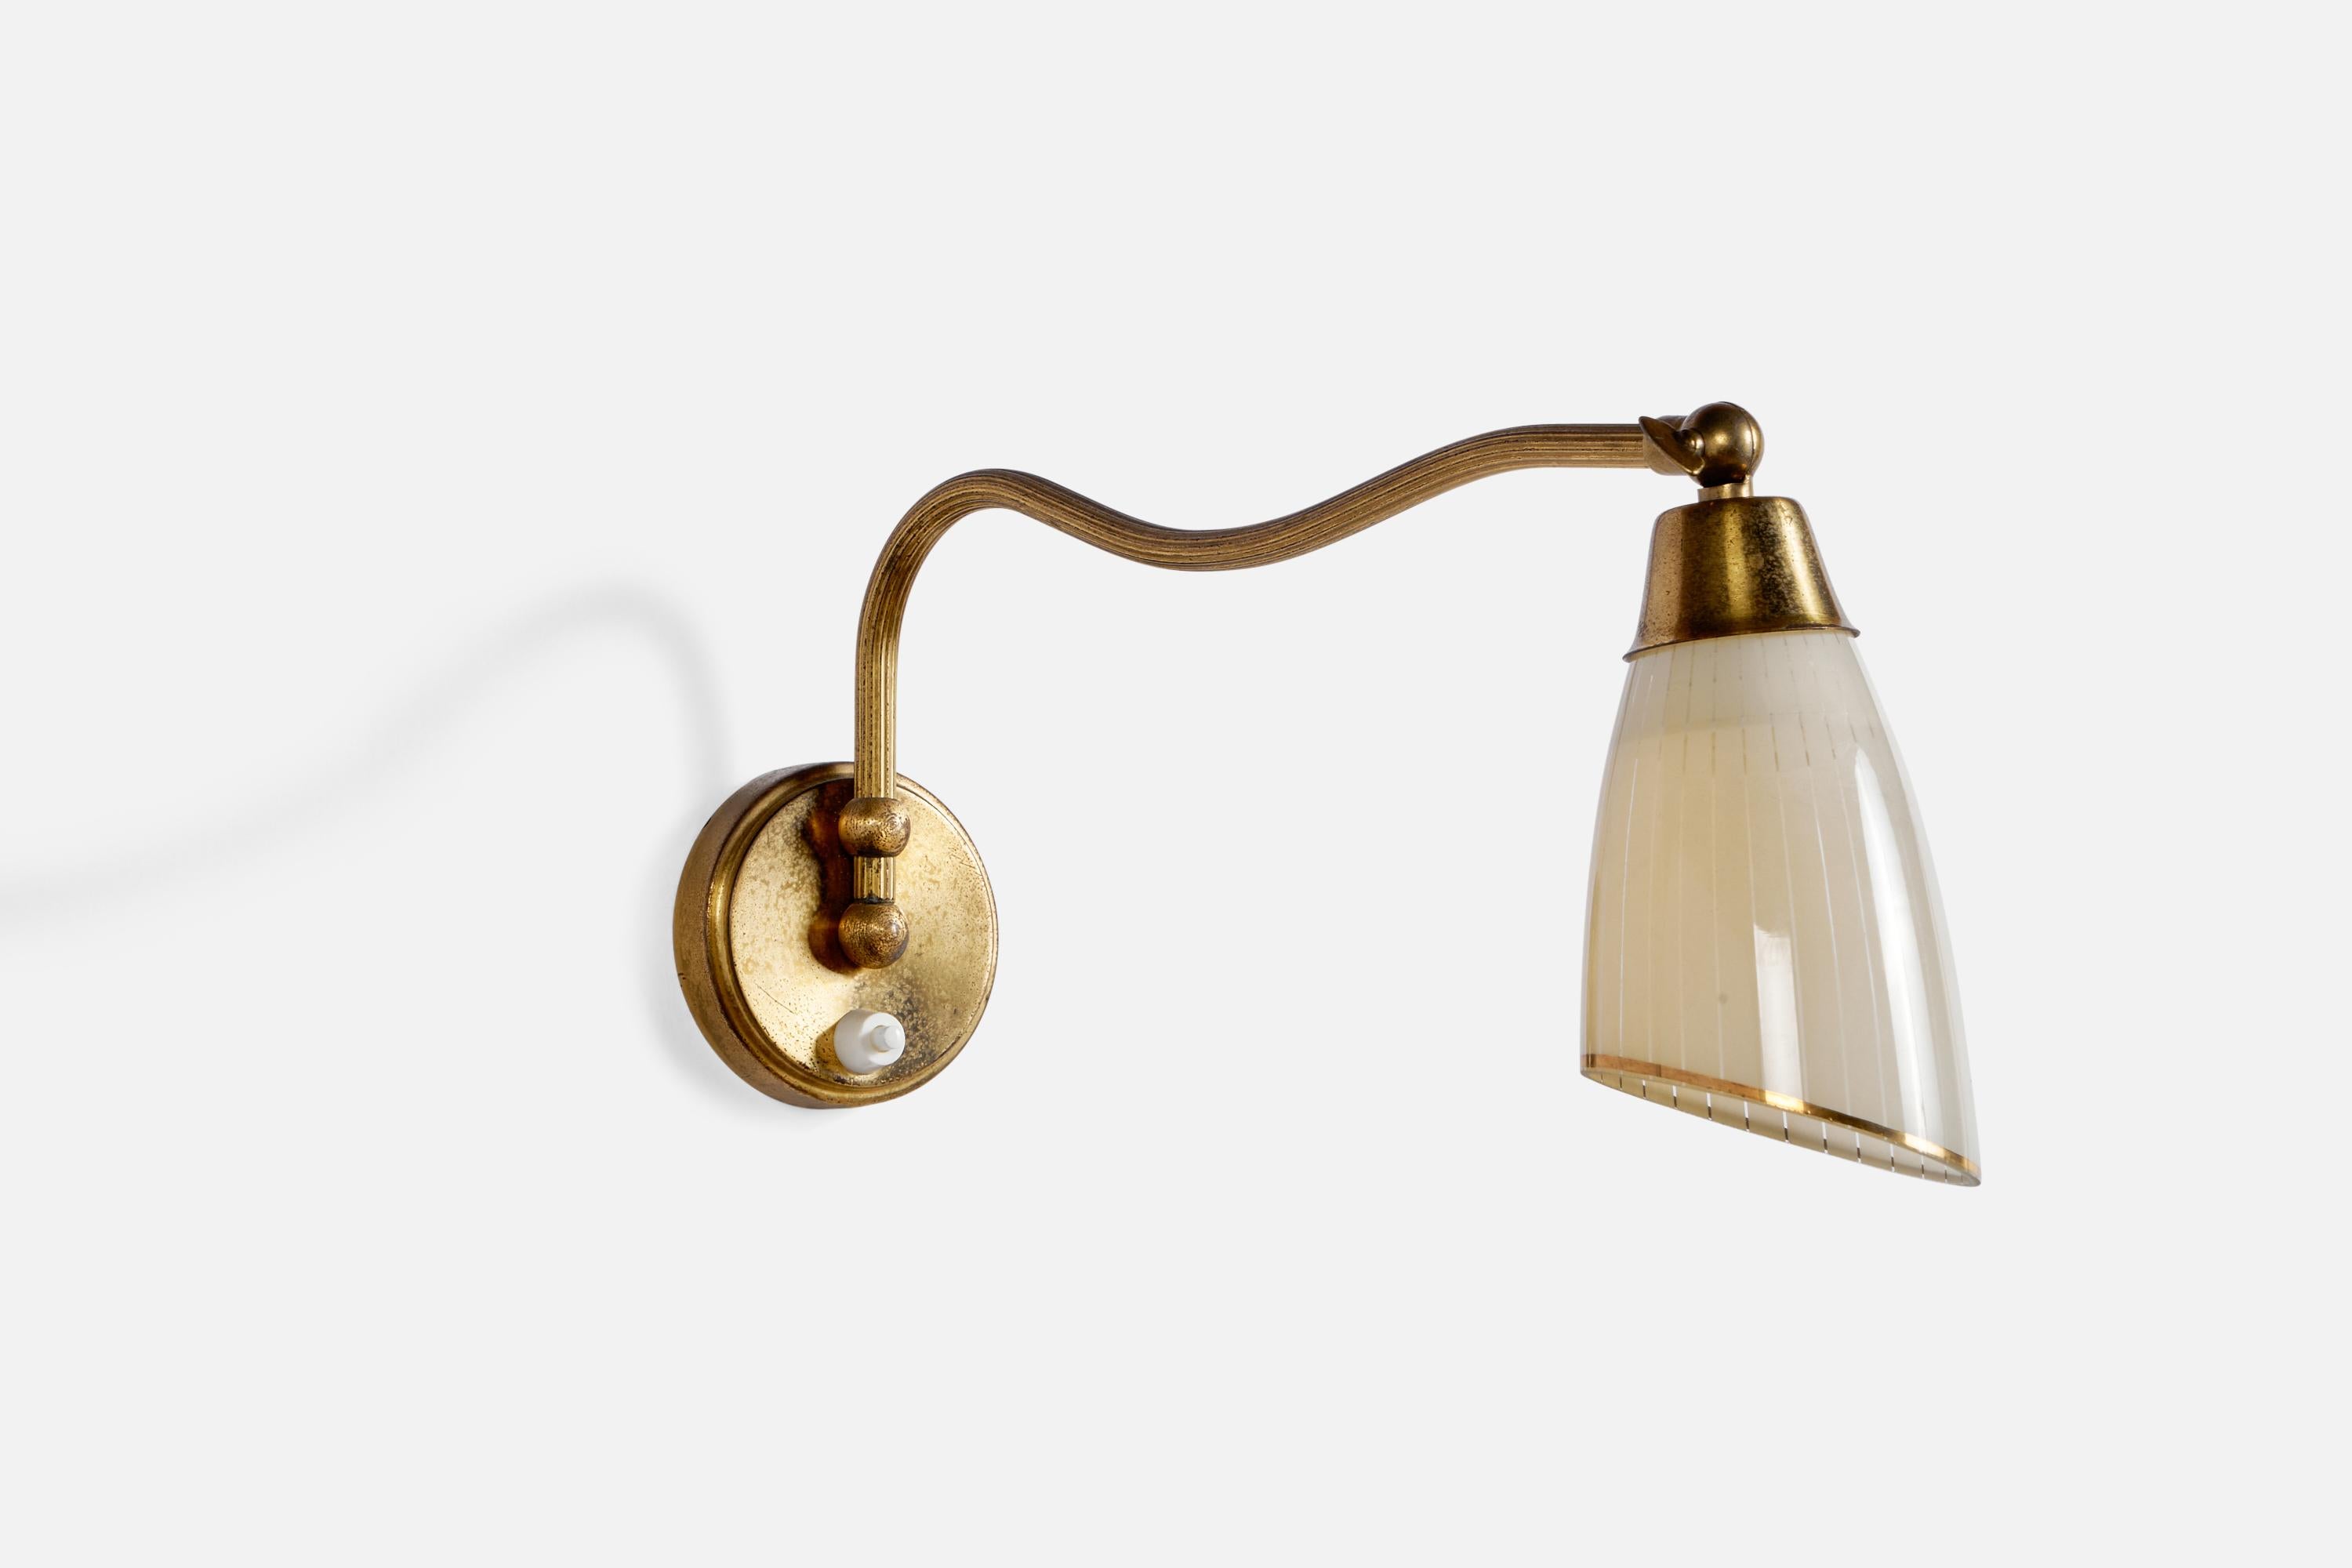 An adjustable brass and gilded opaline glass wall light designed and produced in Denmark, c. 1940s.

Overall Dimensions (inches): 5.8” H x 3.4” W x 14.6” D
Back Plate Dimensions (inches):3.2” Diameter x 0.75” D
Bulb Specifications: E-26 Bulb
Number